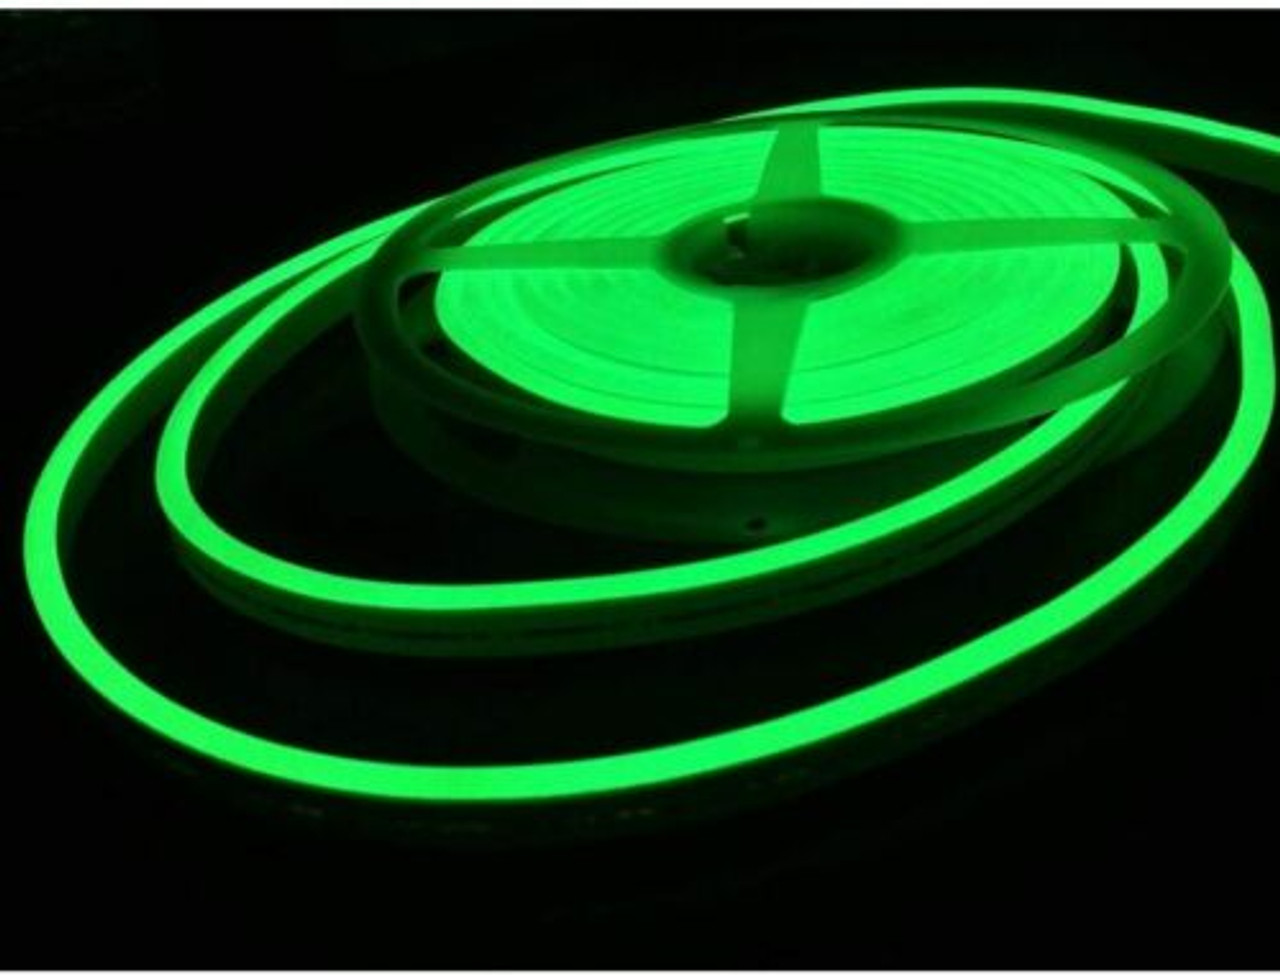 1M 2M 3M 5M 12V Flexible Sign Neon Lights Silicone Tube LED Strip Waterproof USA